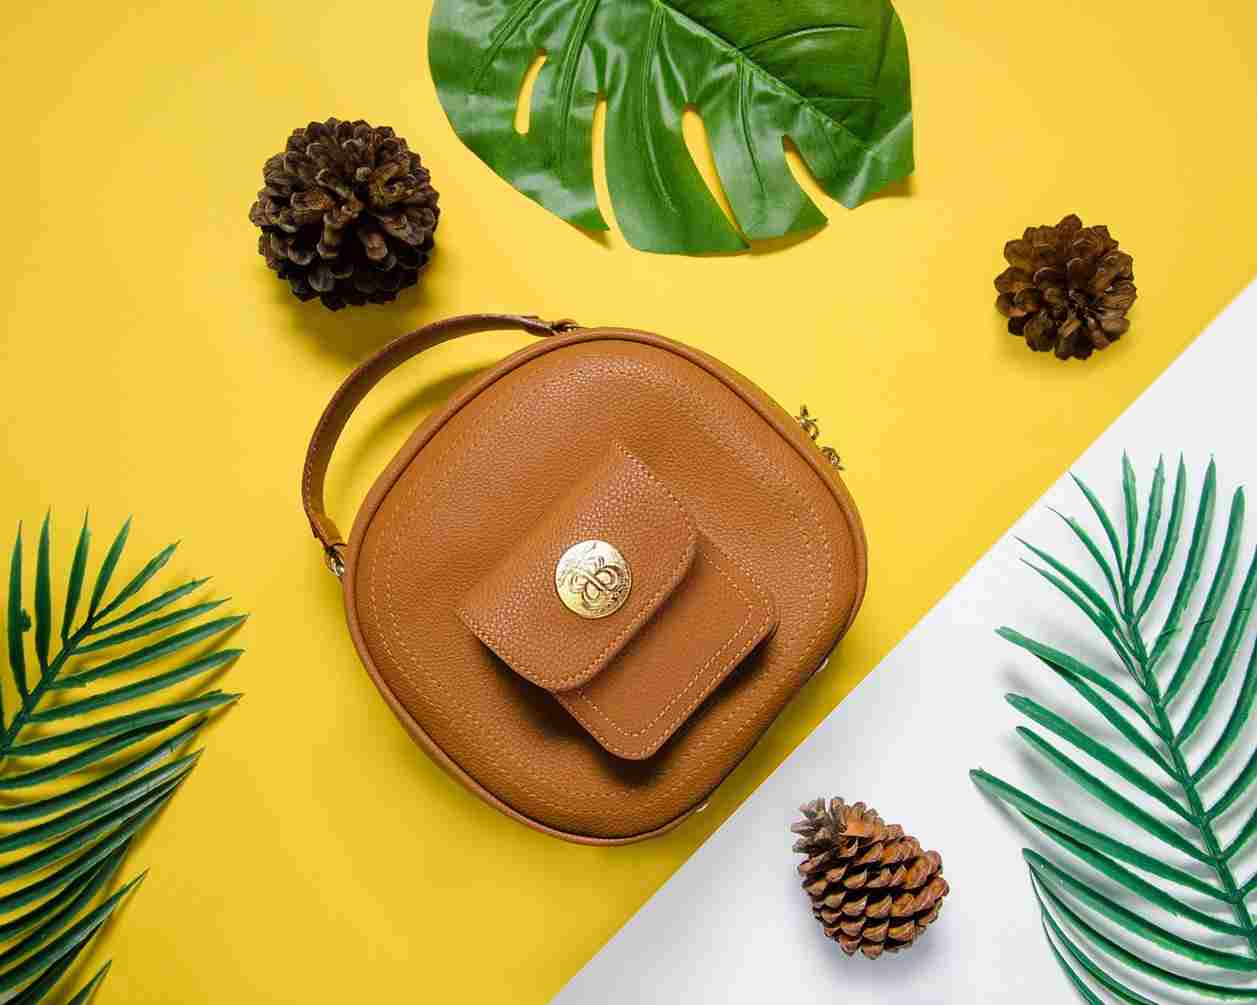 Best Vegan Leather Bags + Great Purchase Price